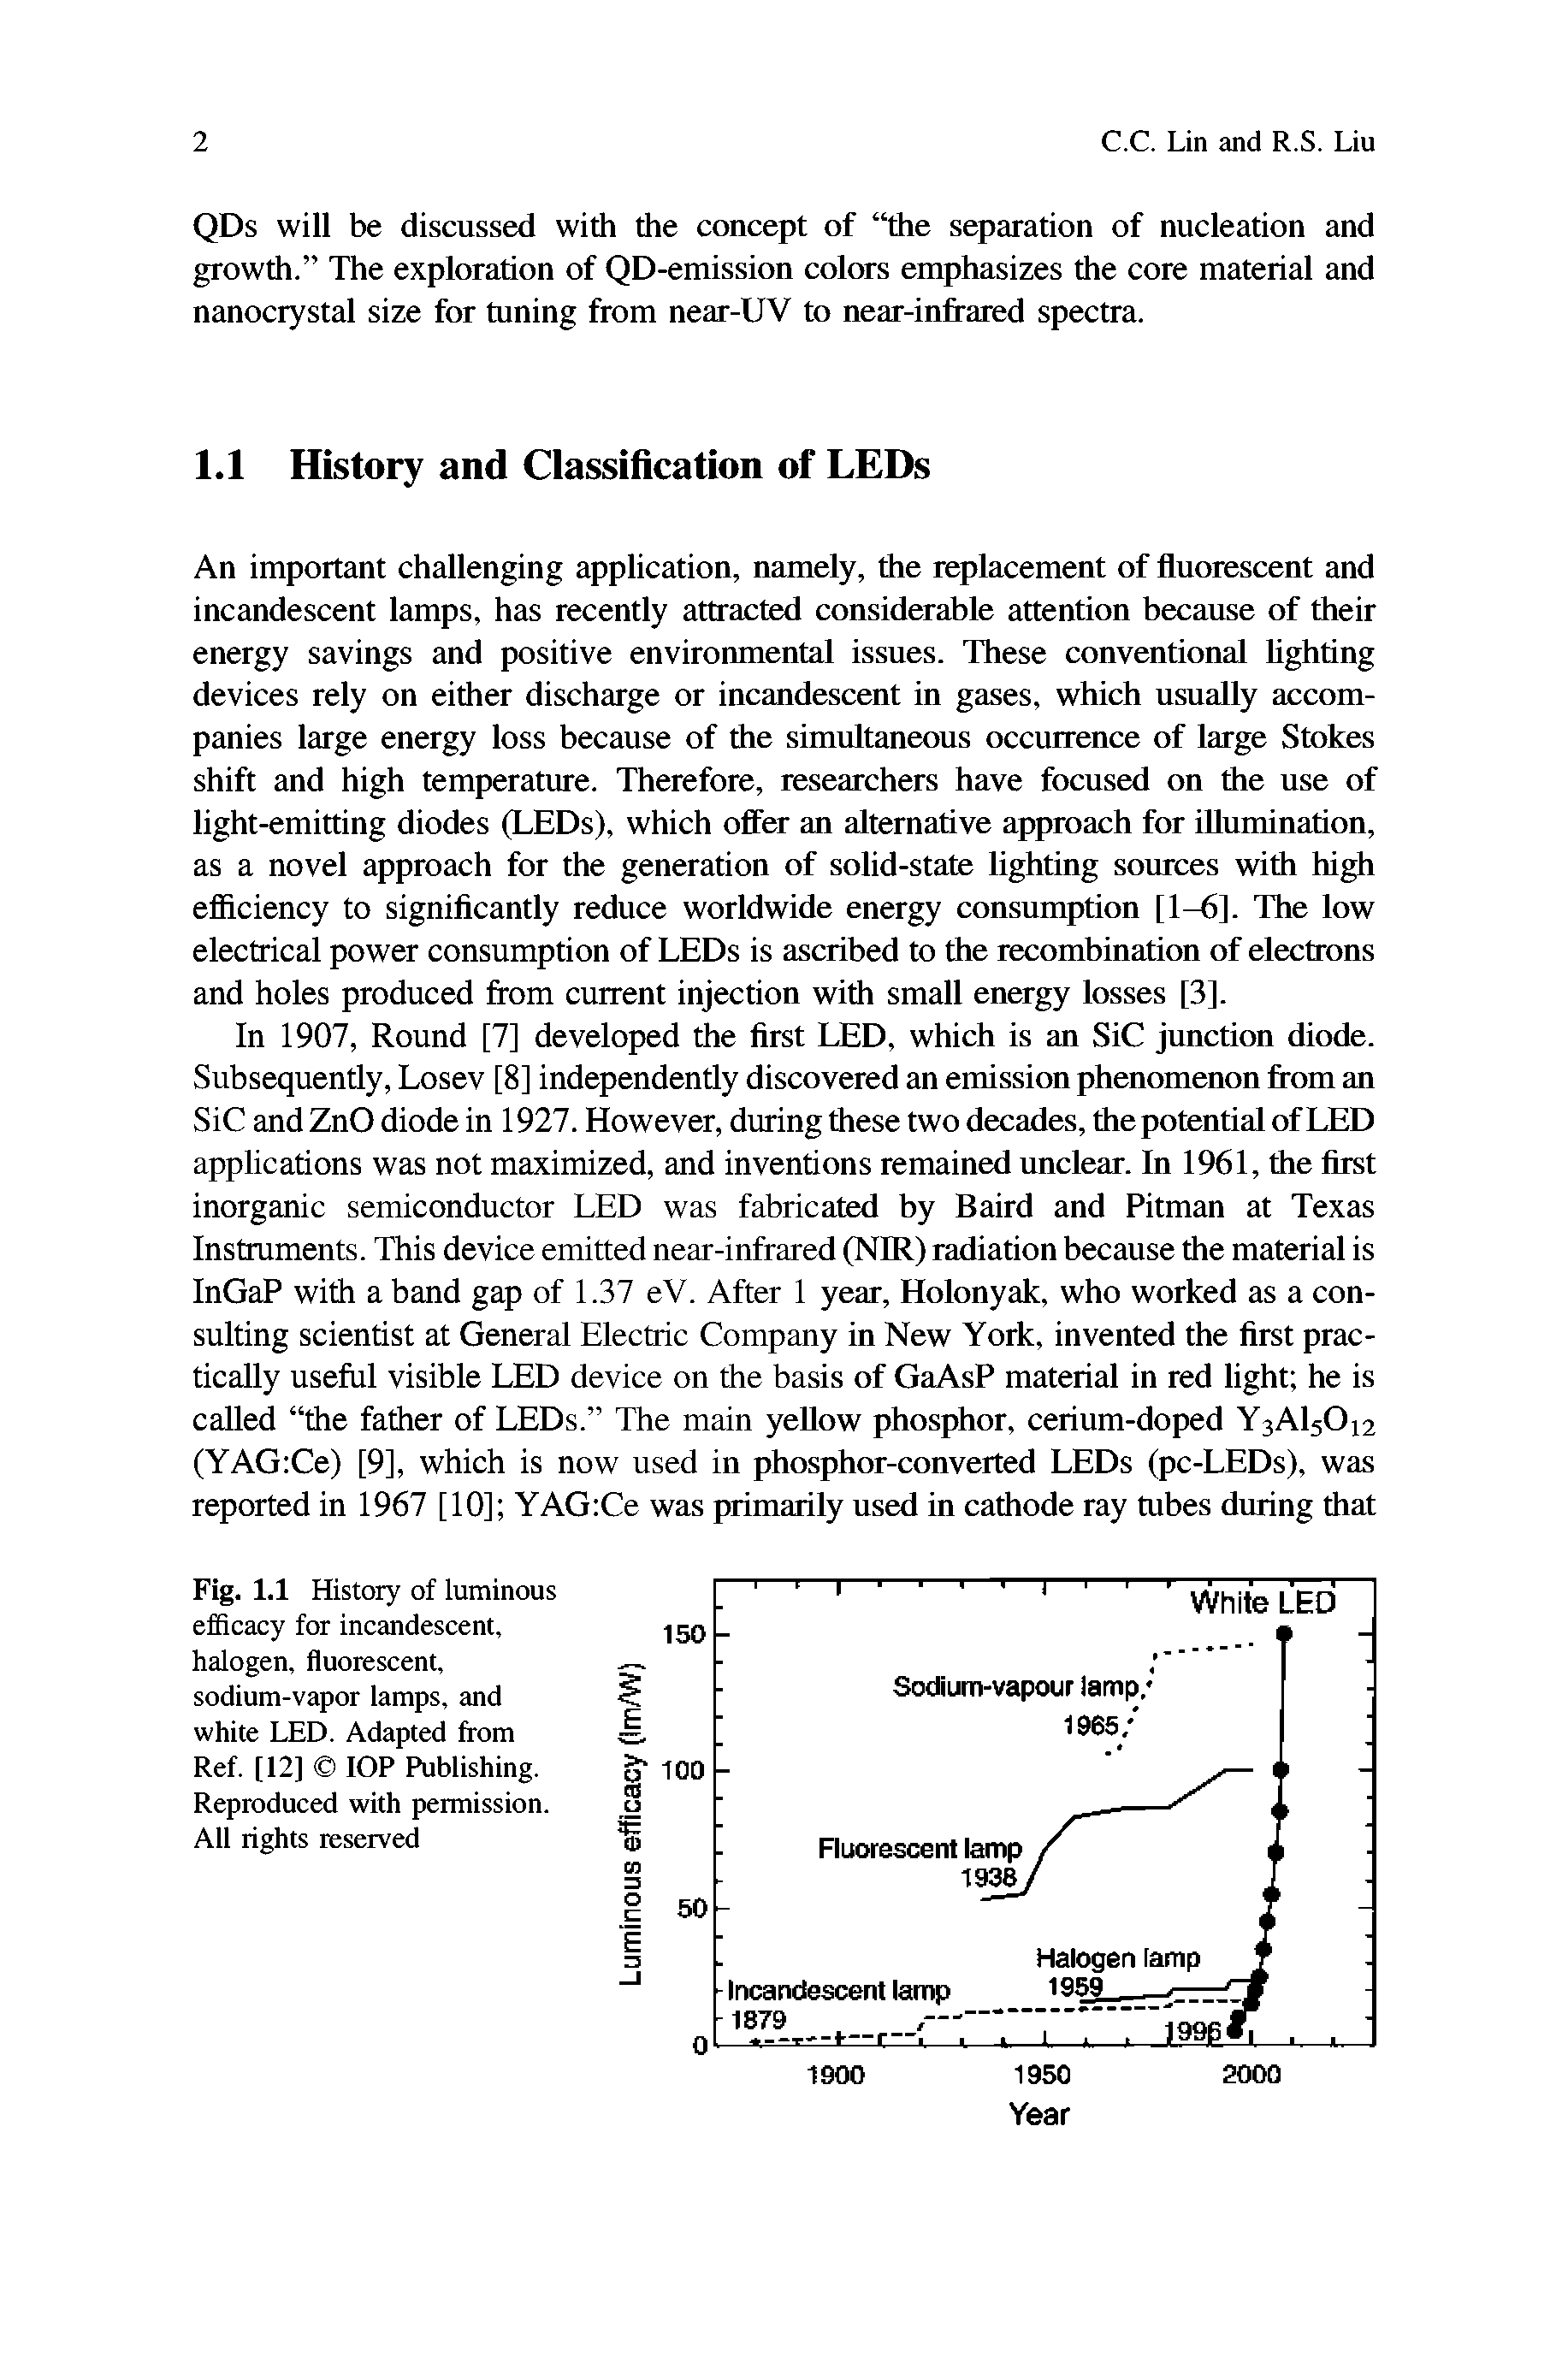 Fig. 1.1 History of luminous efficacy for incandescent, halogen, fluorescent, sodium-vapor lamps, and white LED. Adapted from Ref. [12] lOP Publishing. Reproduced with permission. All rights reserved...